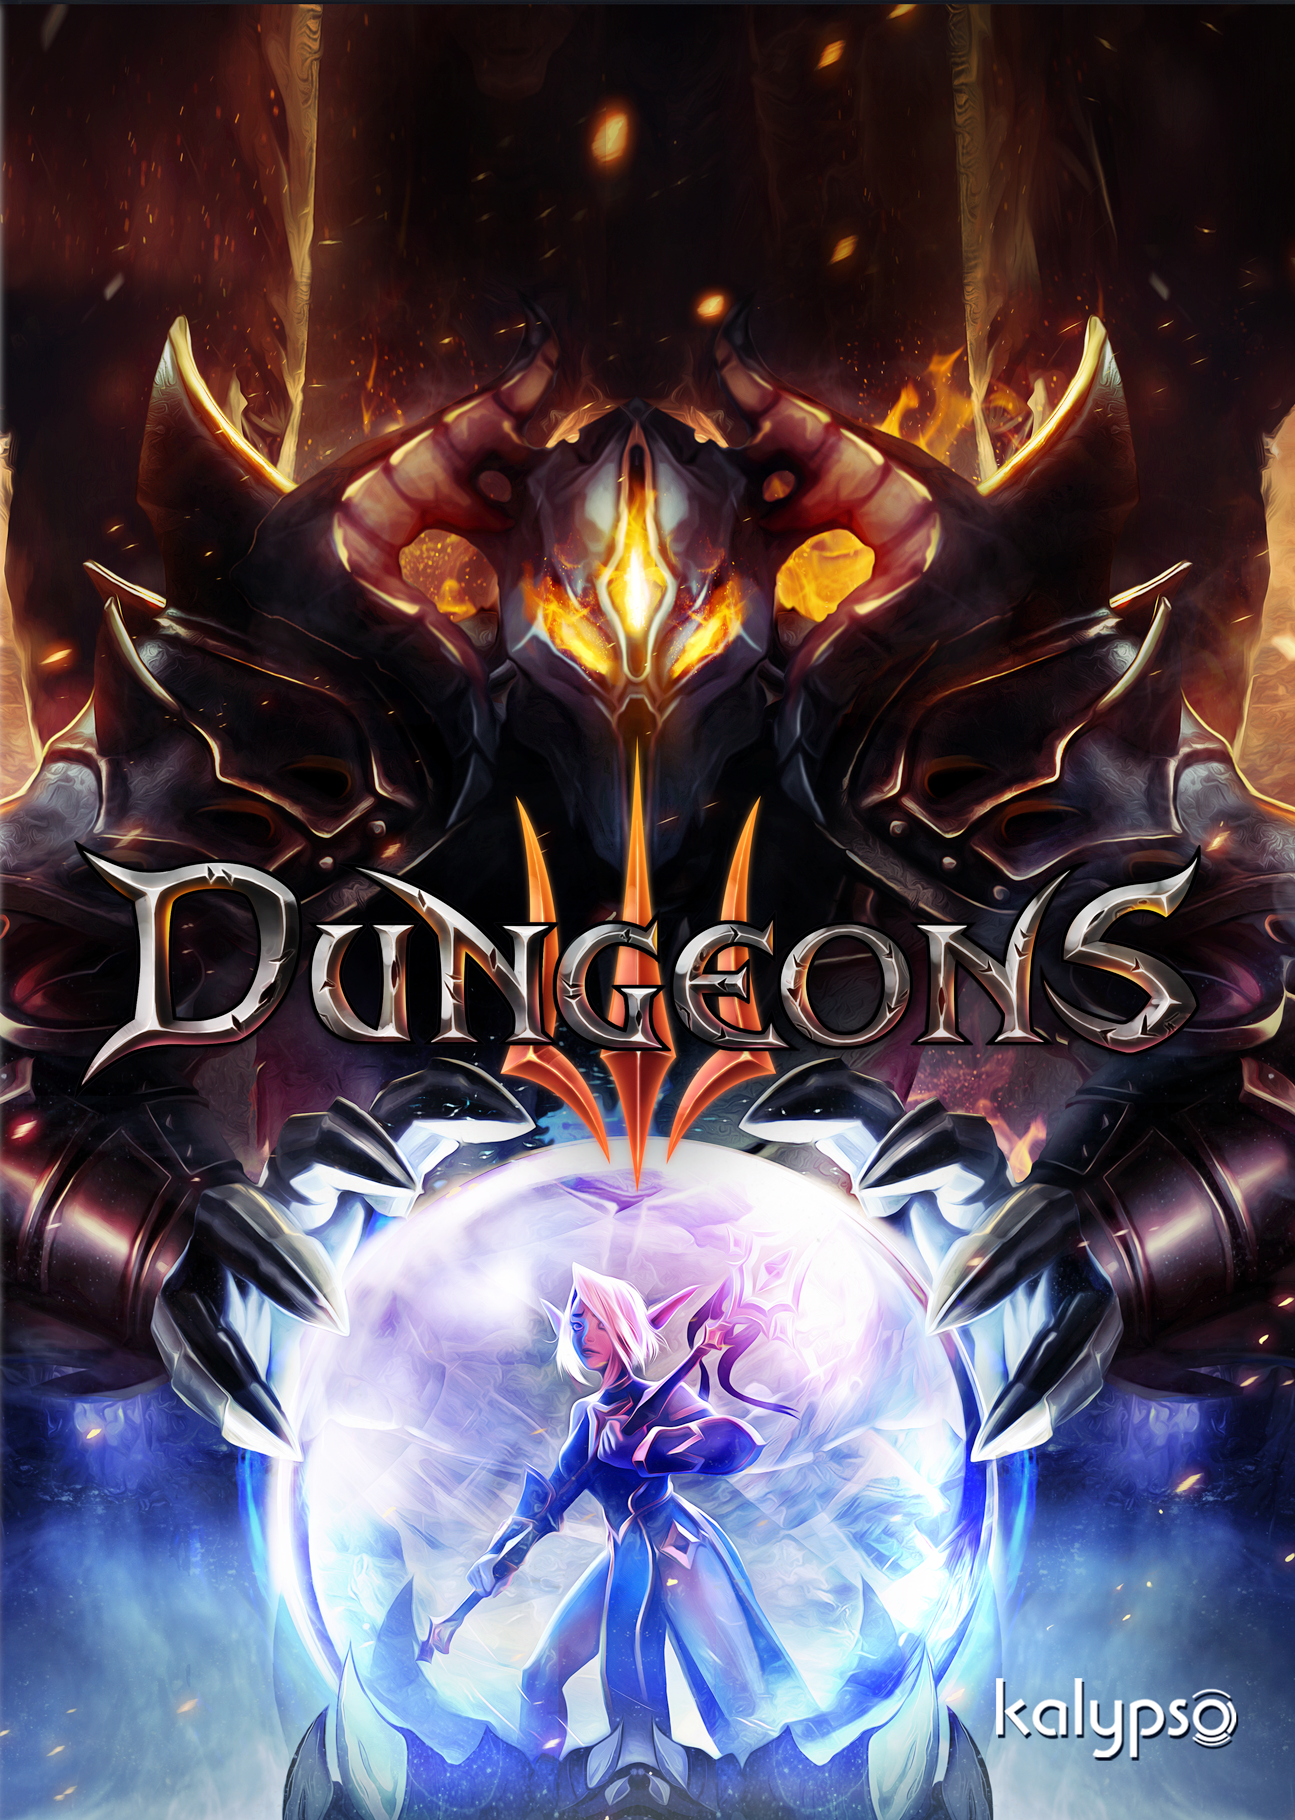 Image of Dungeons 3